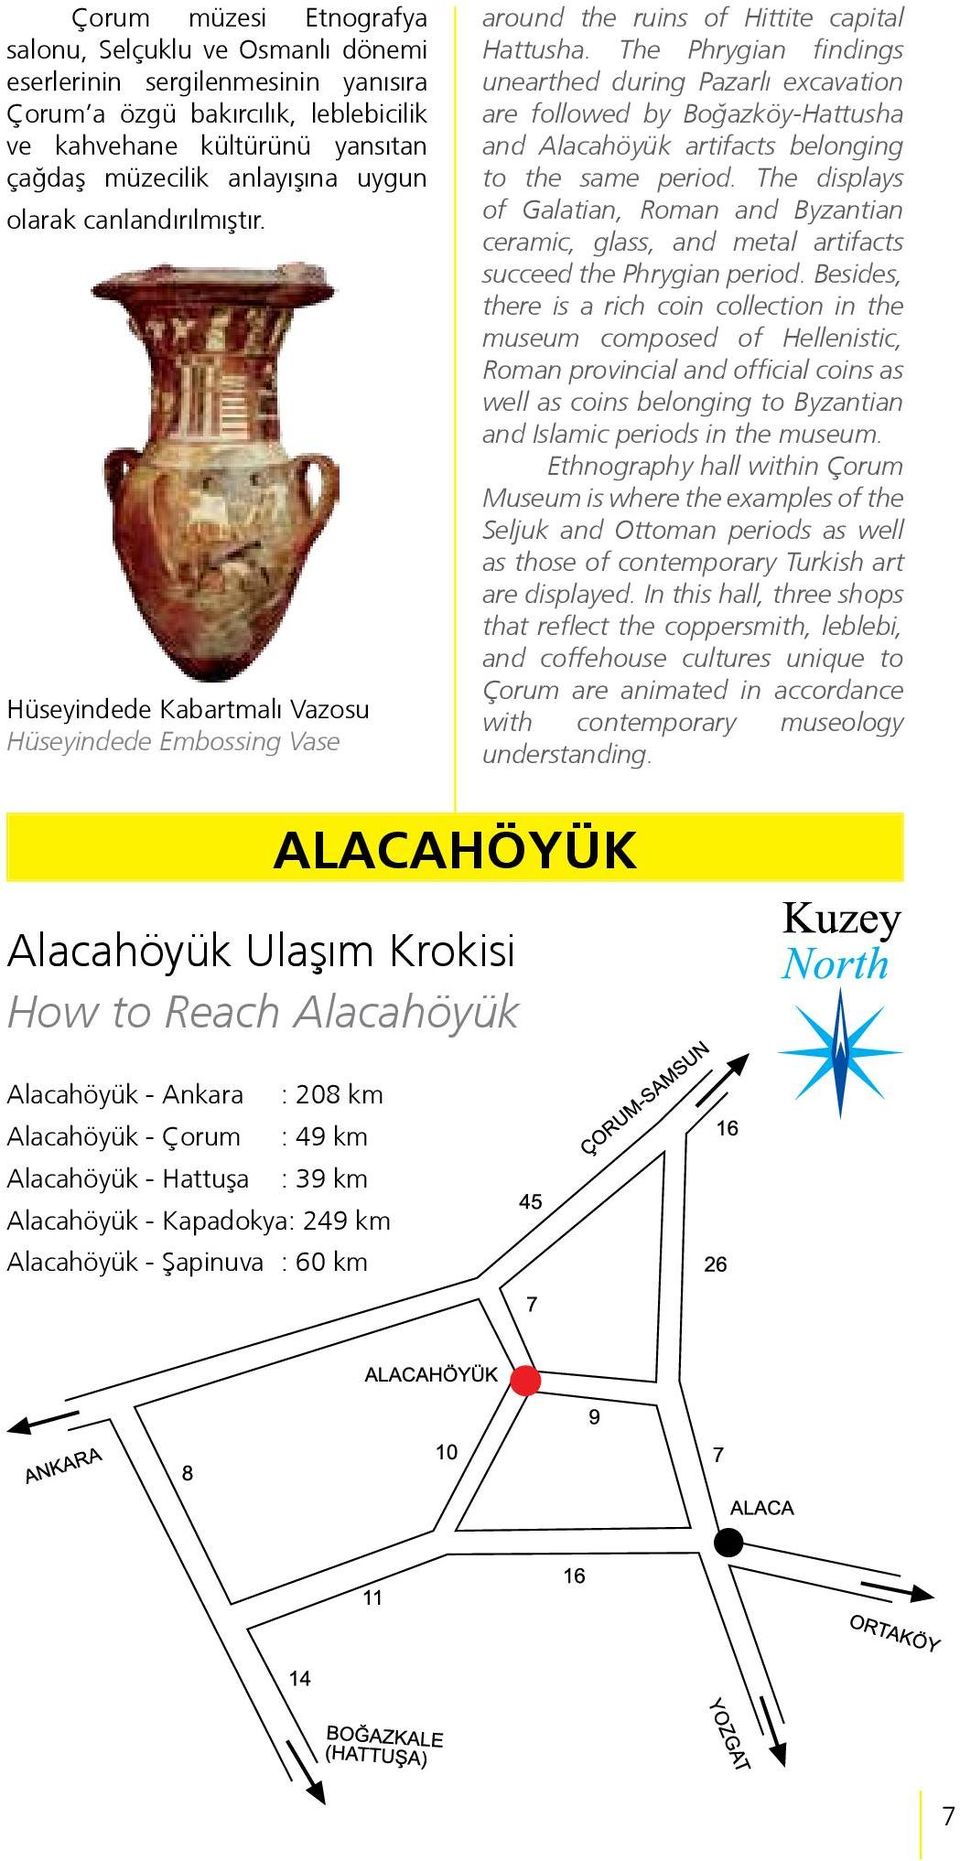 The Phrygian findings unearthed during Pazarlı excavation are followed by Boğazköy-Hattusha and Alacahöyük artifacts belonging to the same period.